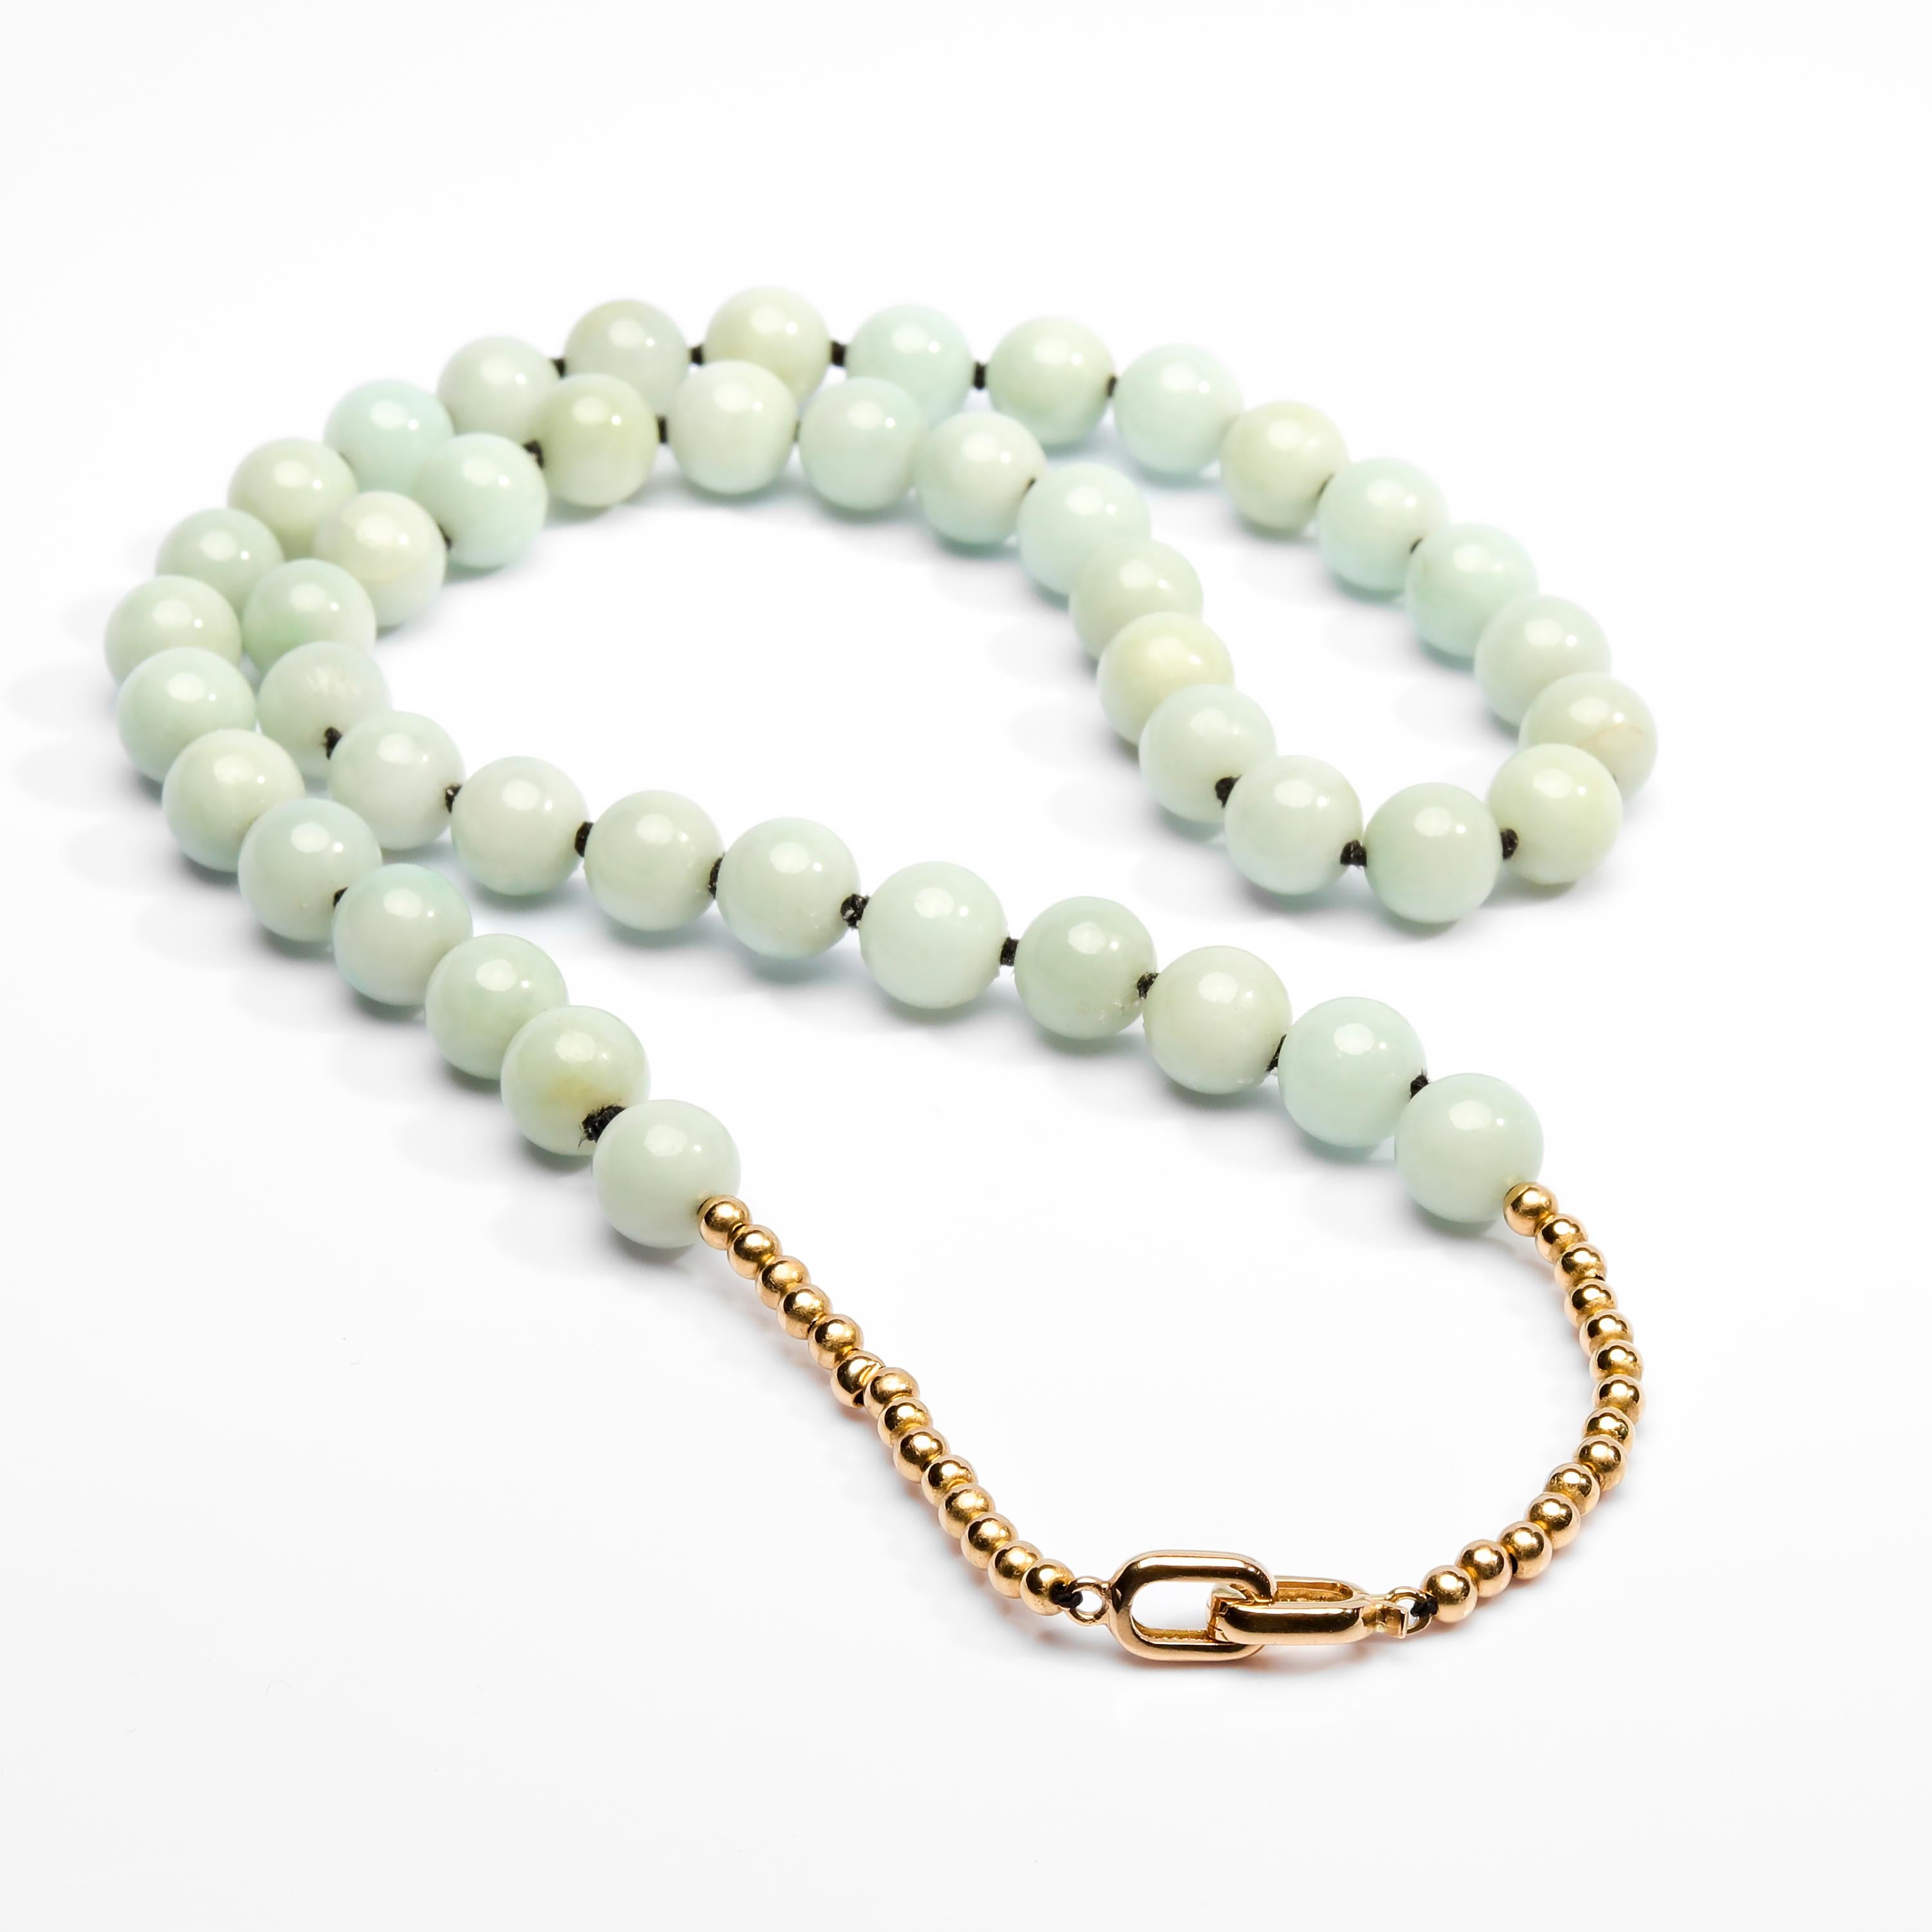 Modern Jade Necklace of Soft Bluish-Green Jadeite is Unexpectedly Sublime